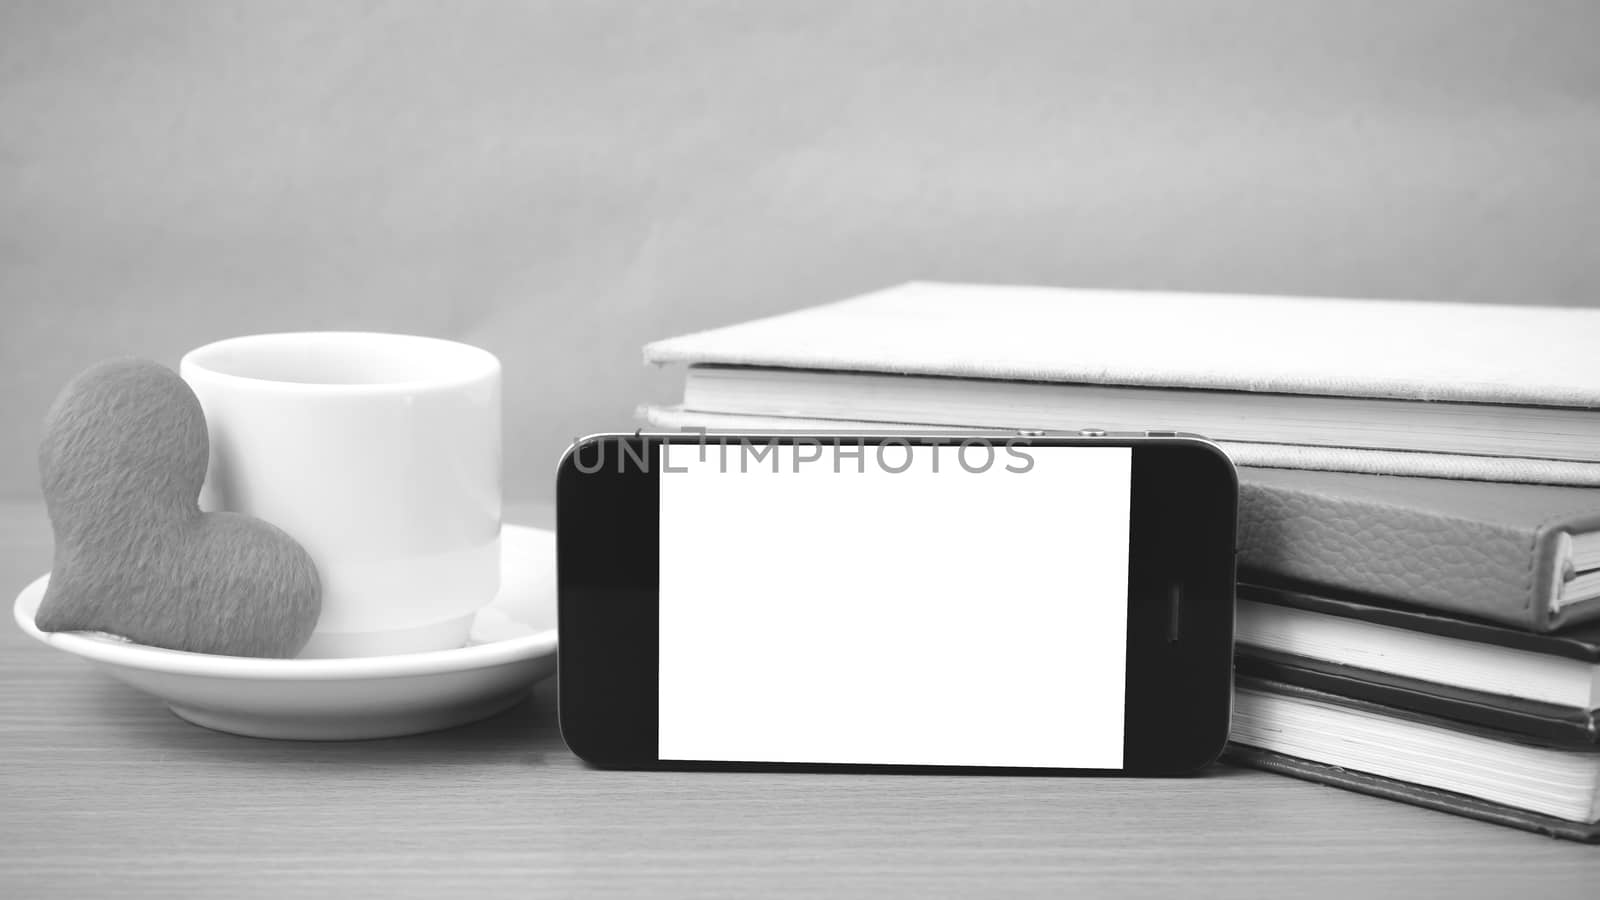 coffee,phone,stack of book and heart on wood table background black and white color